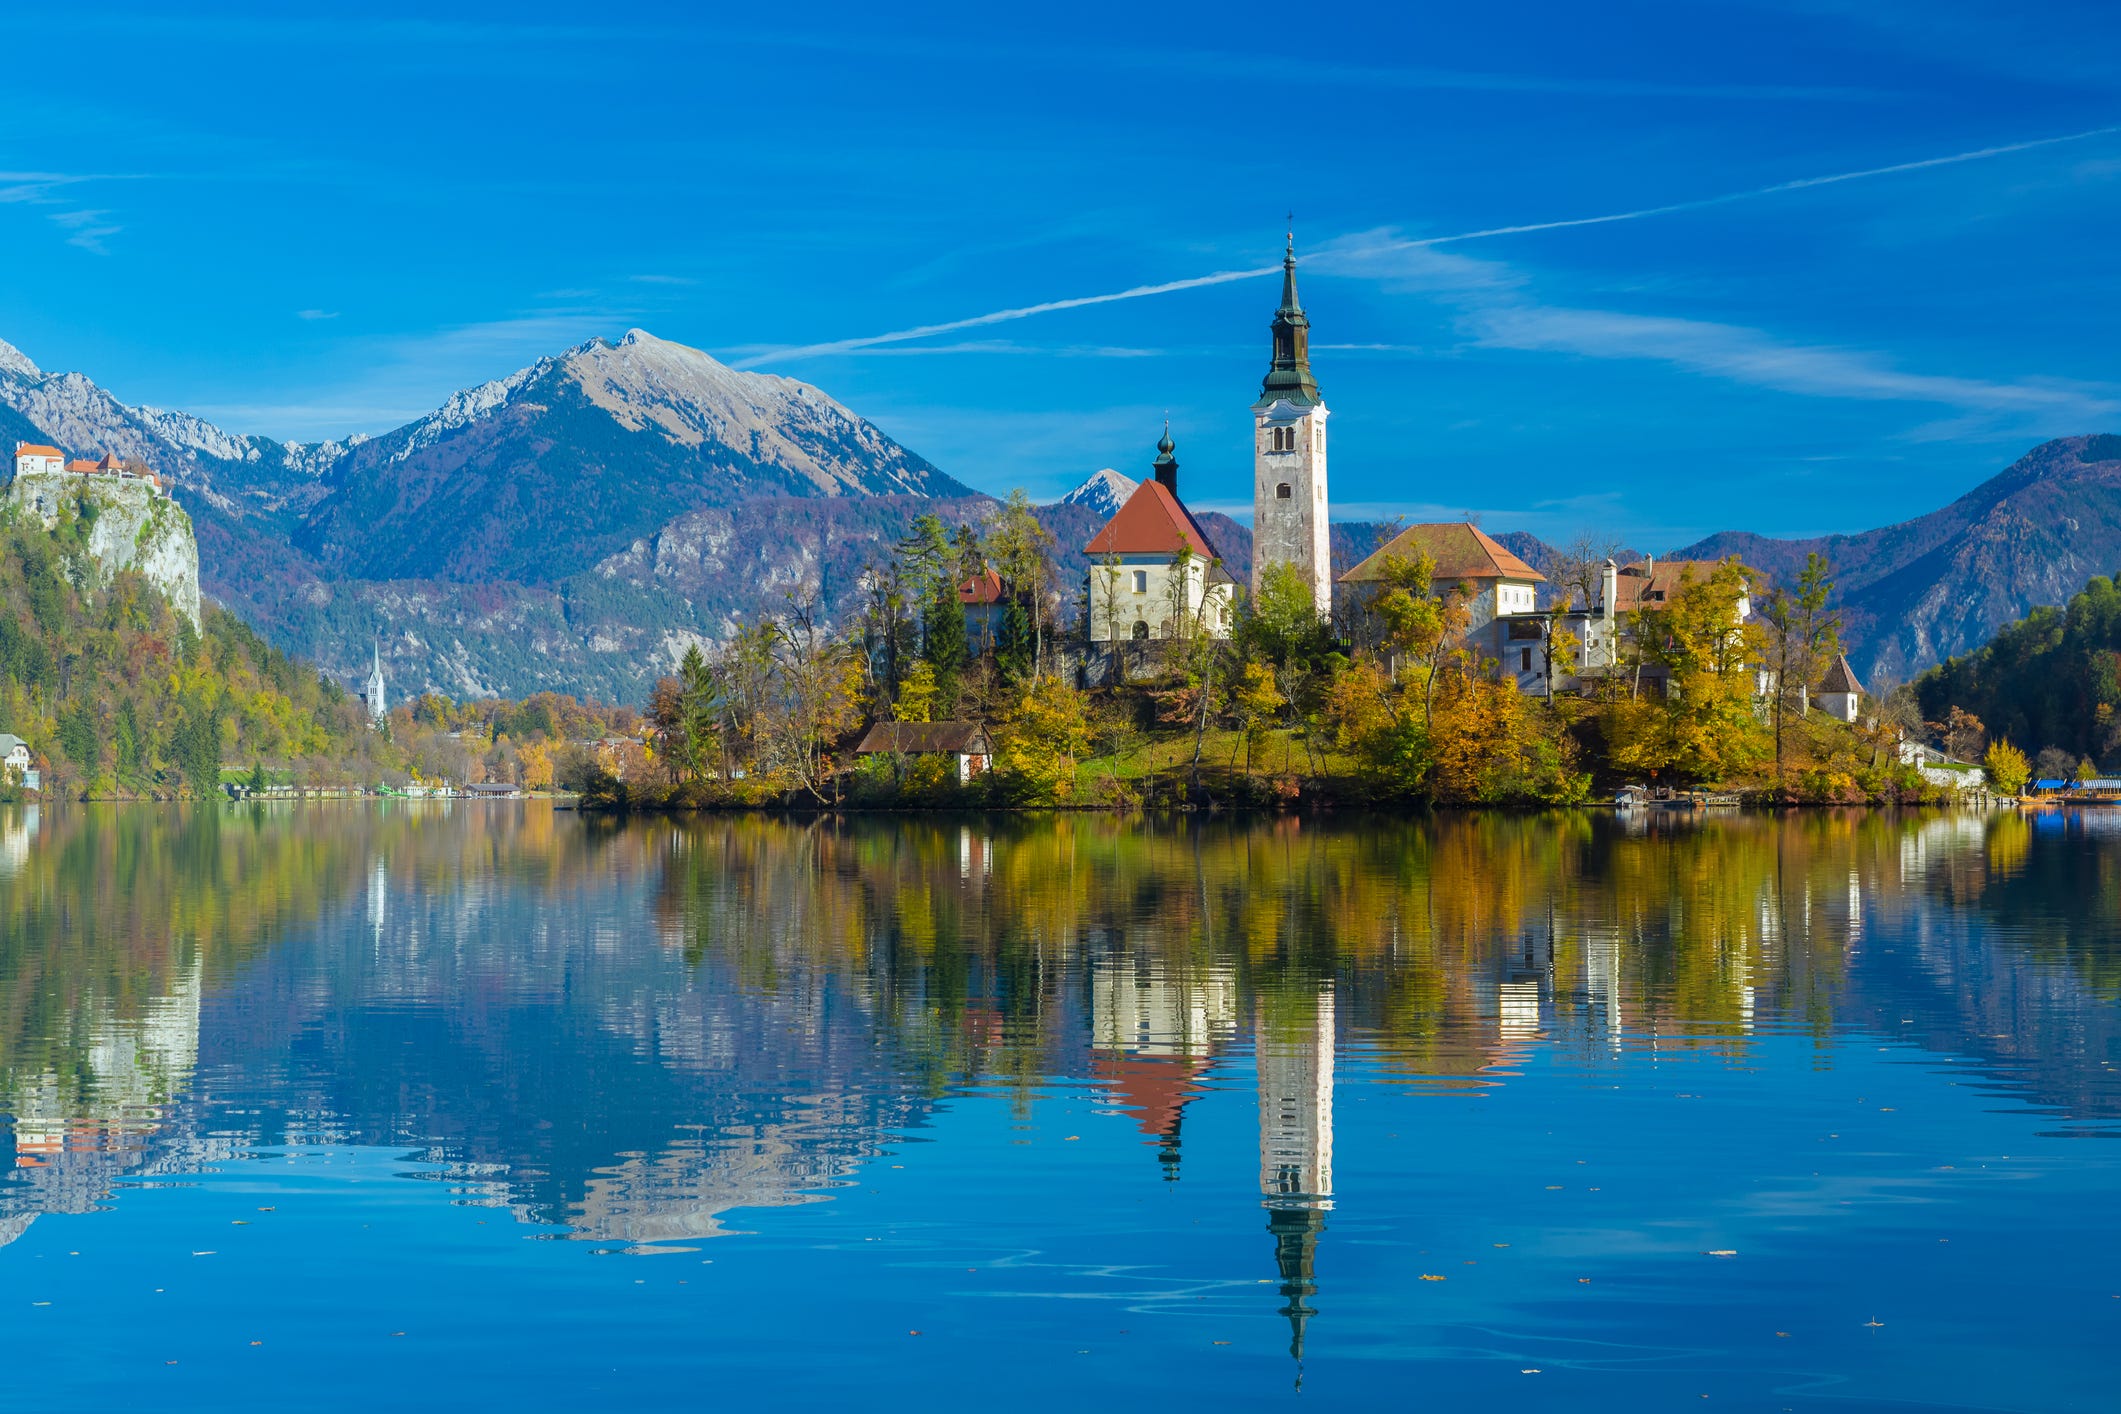 <p>It's a shame more folks don't visit Slovenia, as it borders Italy and can be added to any <a href="https://www.businessinsider.com/things-do-differently-next-trip-to-italy-2023-10">Italian itinerary</a>.</p><p>Although the postcard-perfect capital of Ljubljana is beautiful, a trip to Lake Bled shouldn't be missed. Set in the Julian Alps — only about 30 miles from the capital — the lake is the prettiest I have seen.</p><p>Standing on the north shore of the lake is the medieval Bled Castle, which makes the perfect backdrop for the lake. Photographers can utilize the lake's reflection to create an artistic masterpiece.</p>